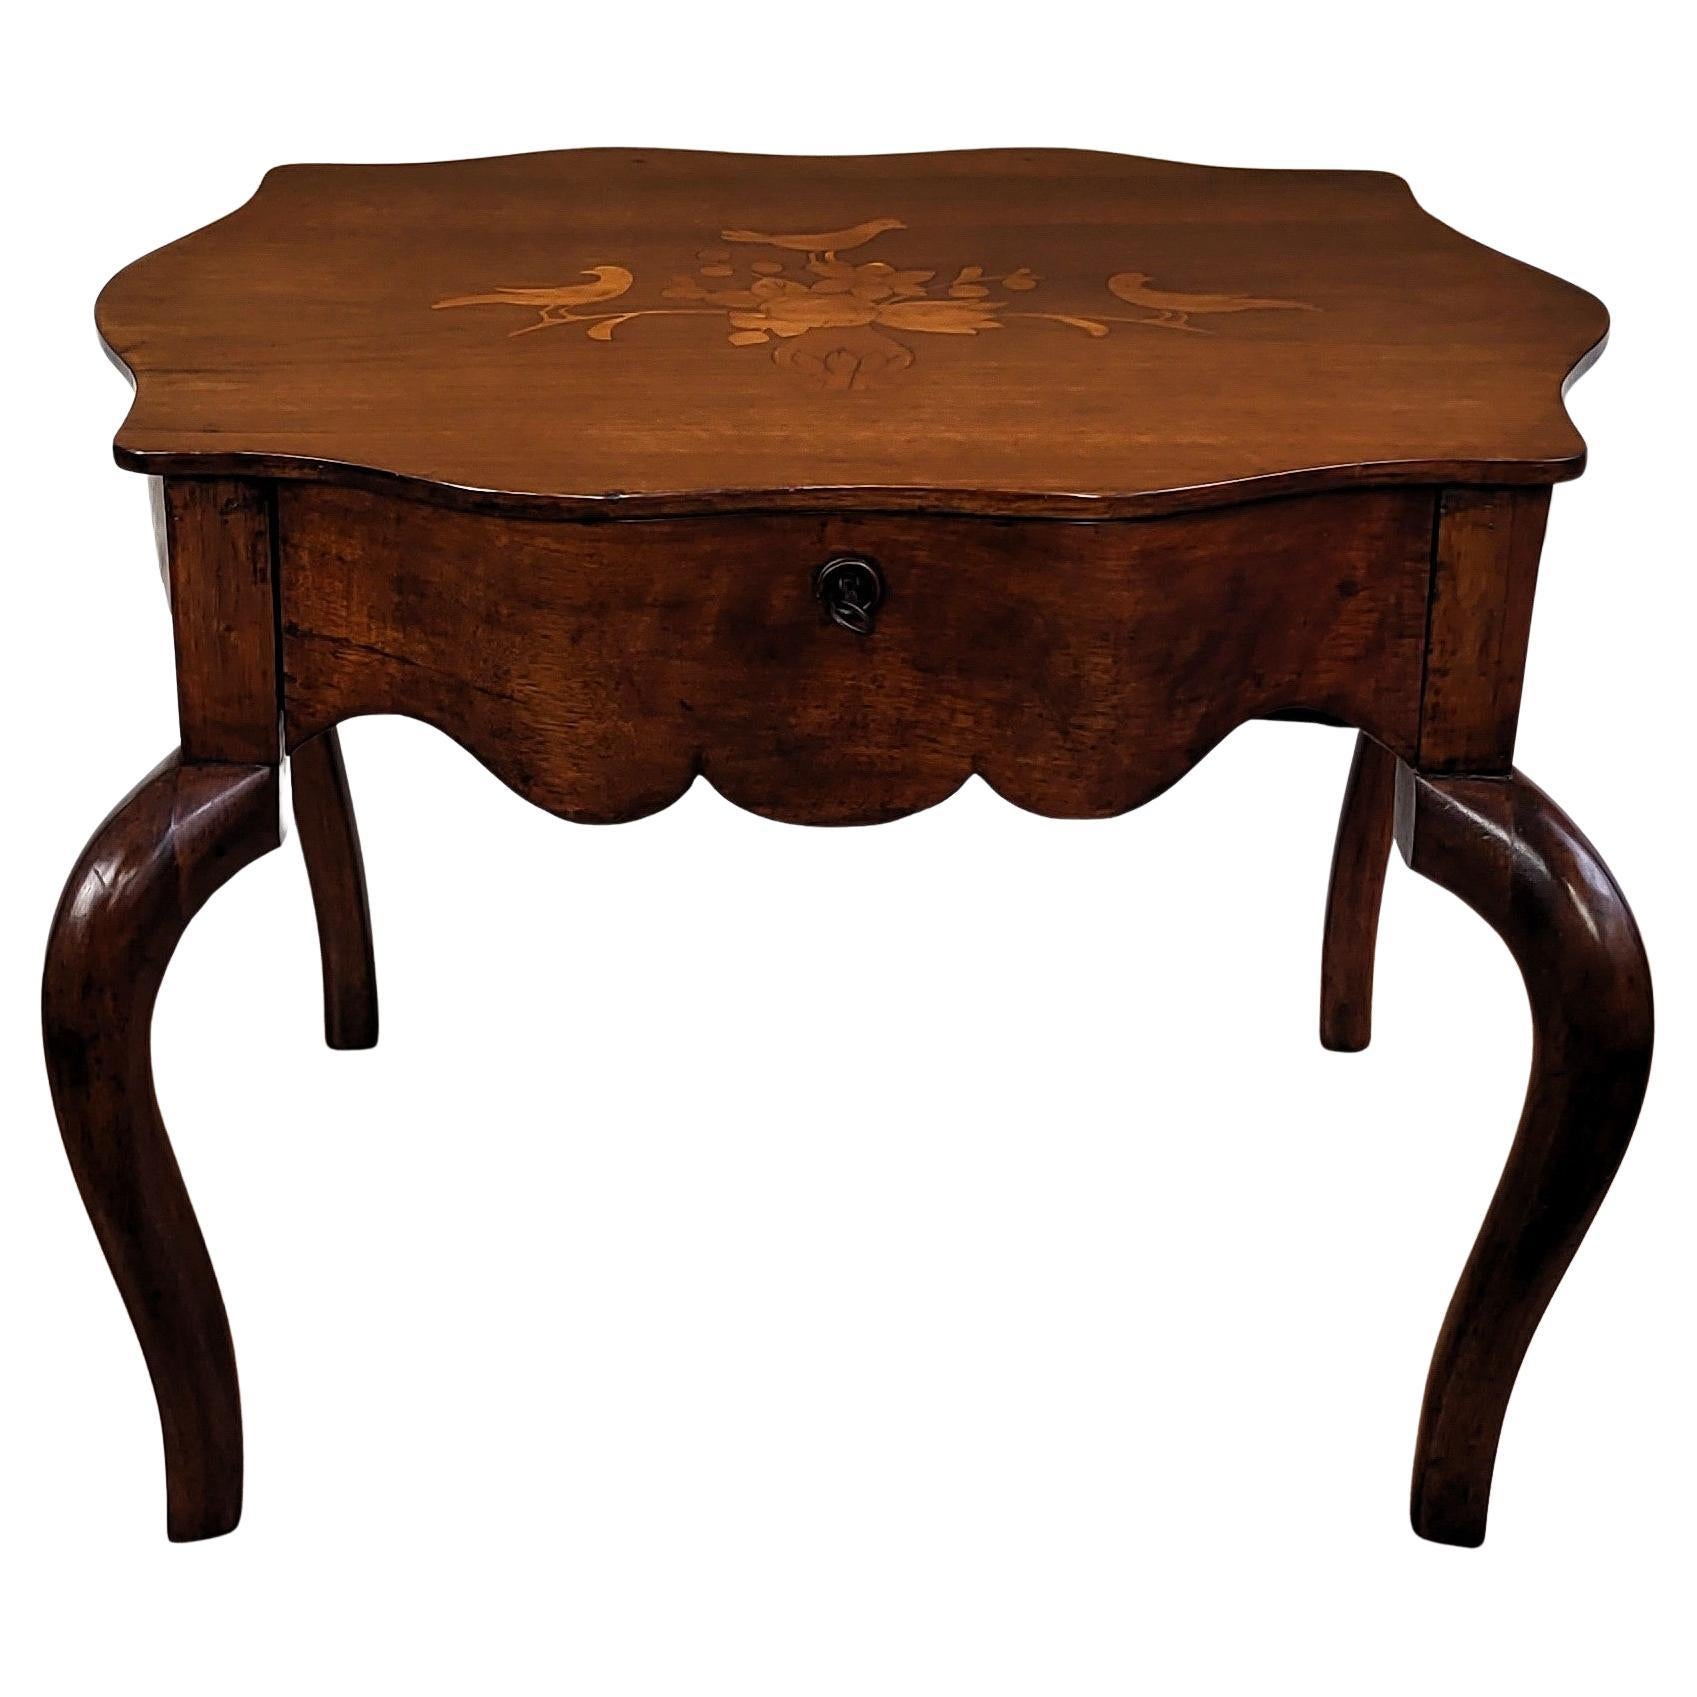 Neoclassical Italian Walnut Inlay Marquetry Spider Coffee Sofa or Side Table